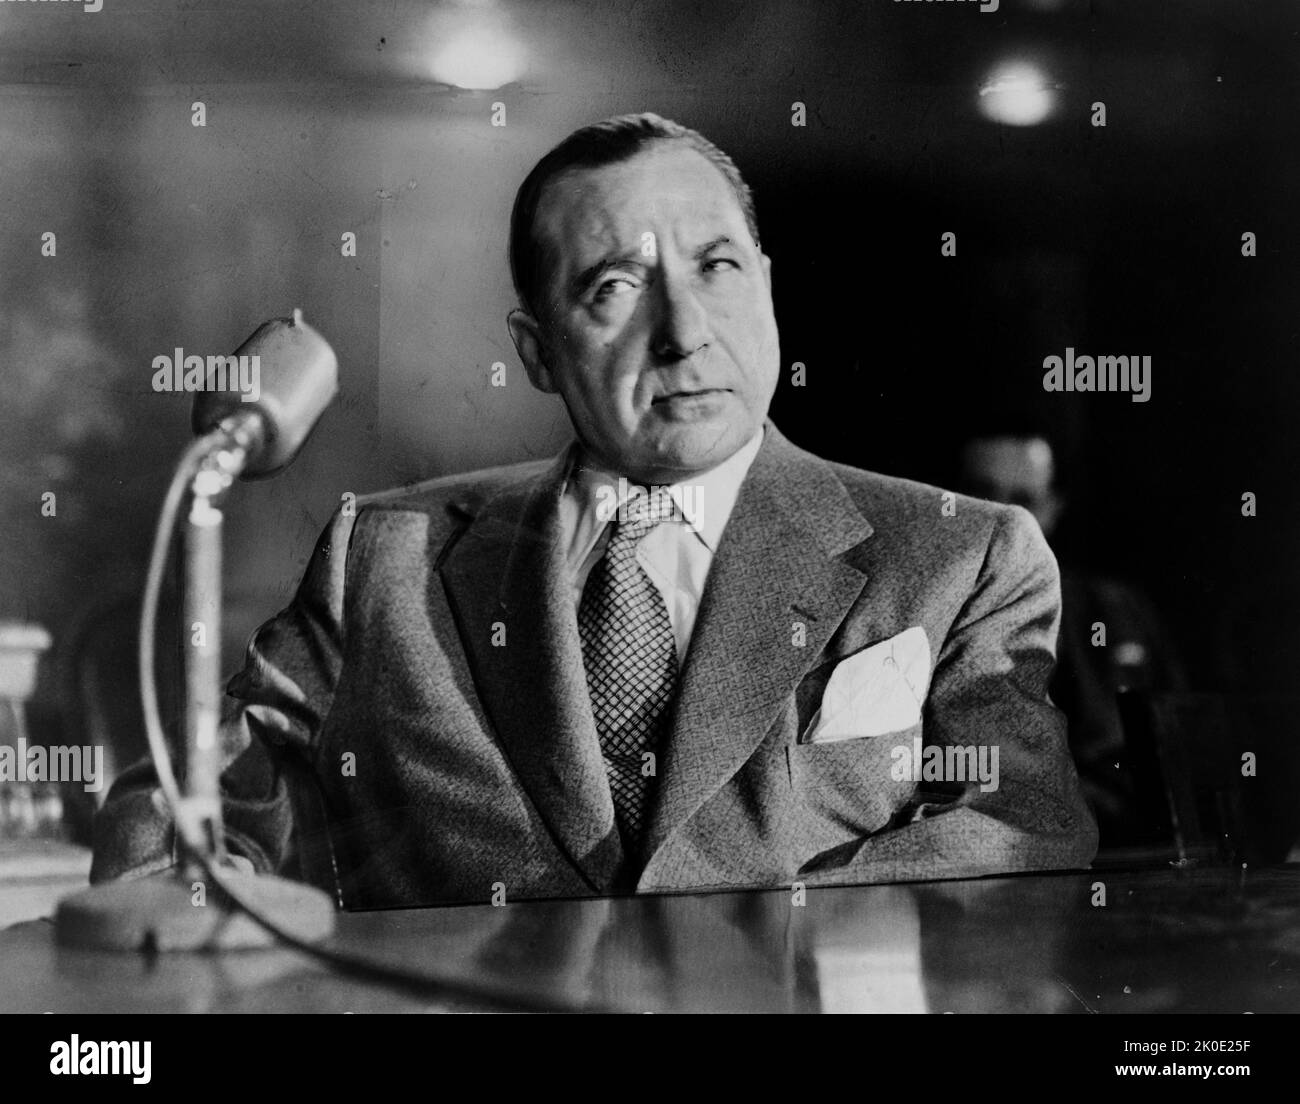 Vito genovese Black and White Stock Photos & Images - Alamy